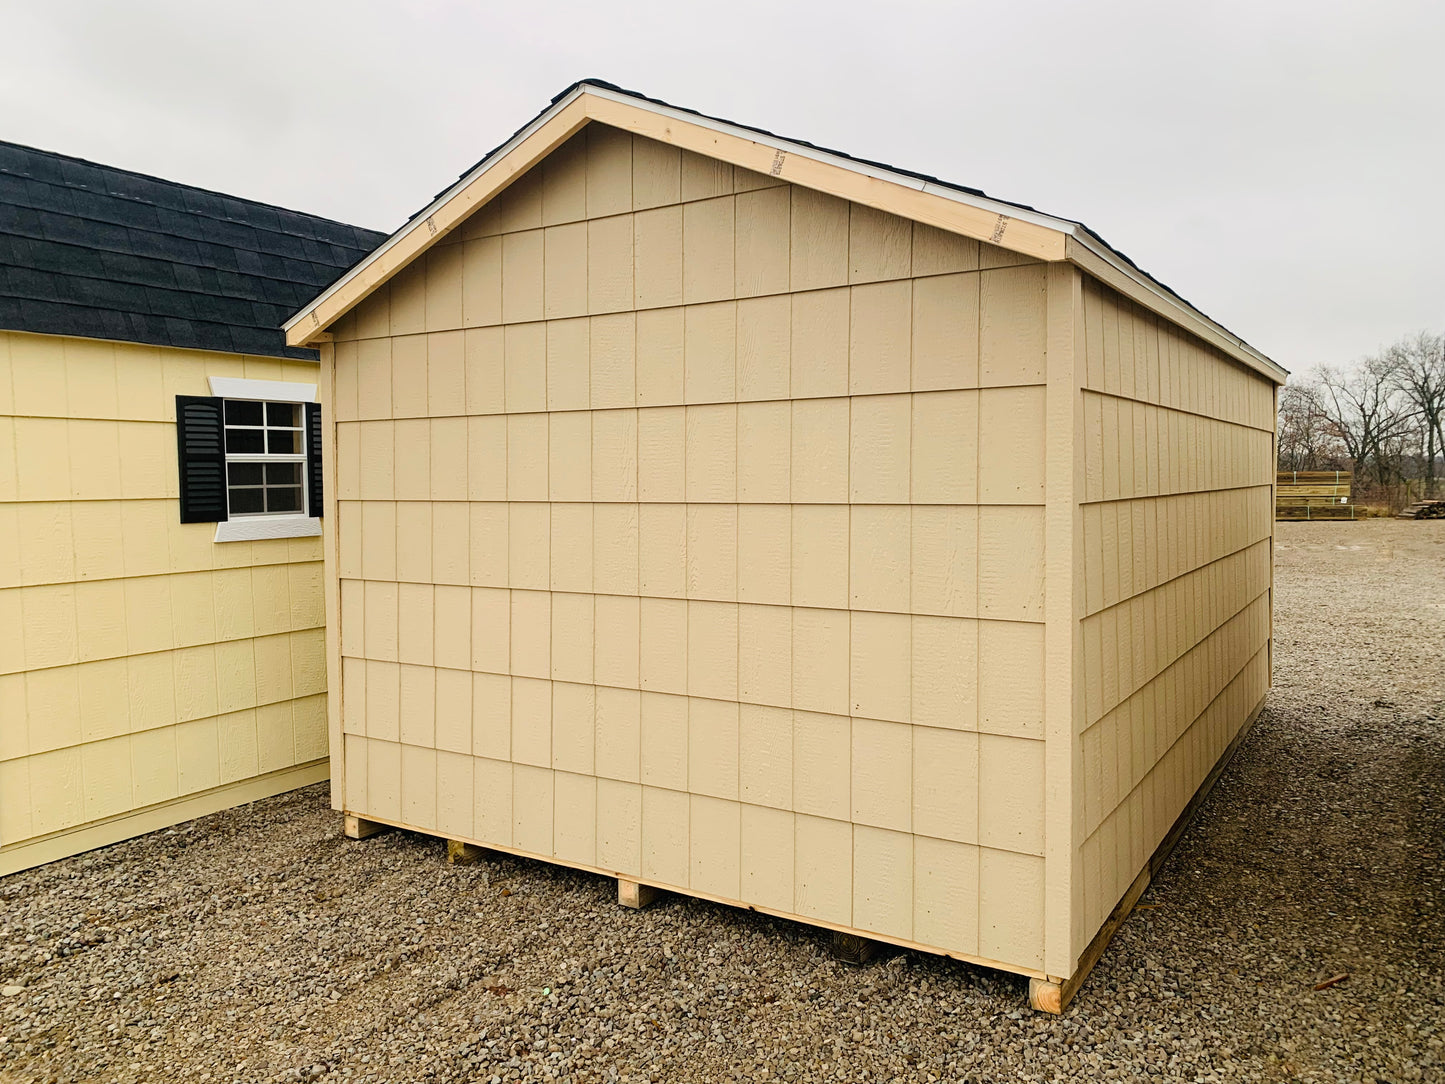 10x16 Special Buy Gable Shed with 18" Lap Siding